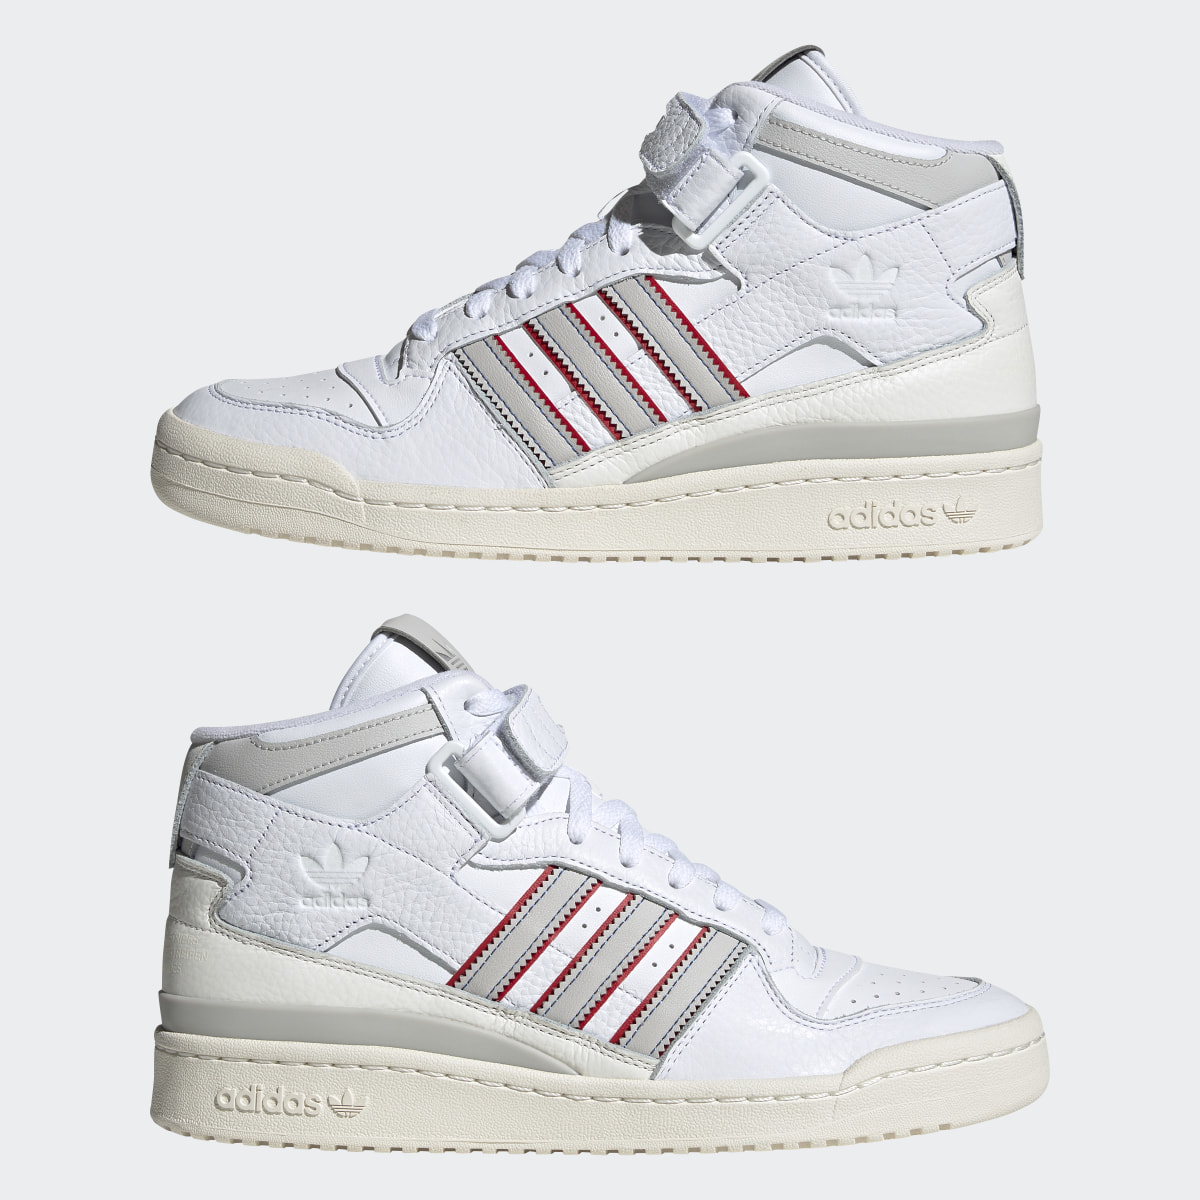 Adidas Forum Mid Shoes. 8